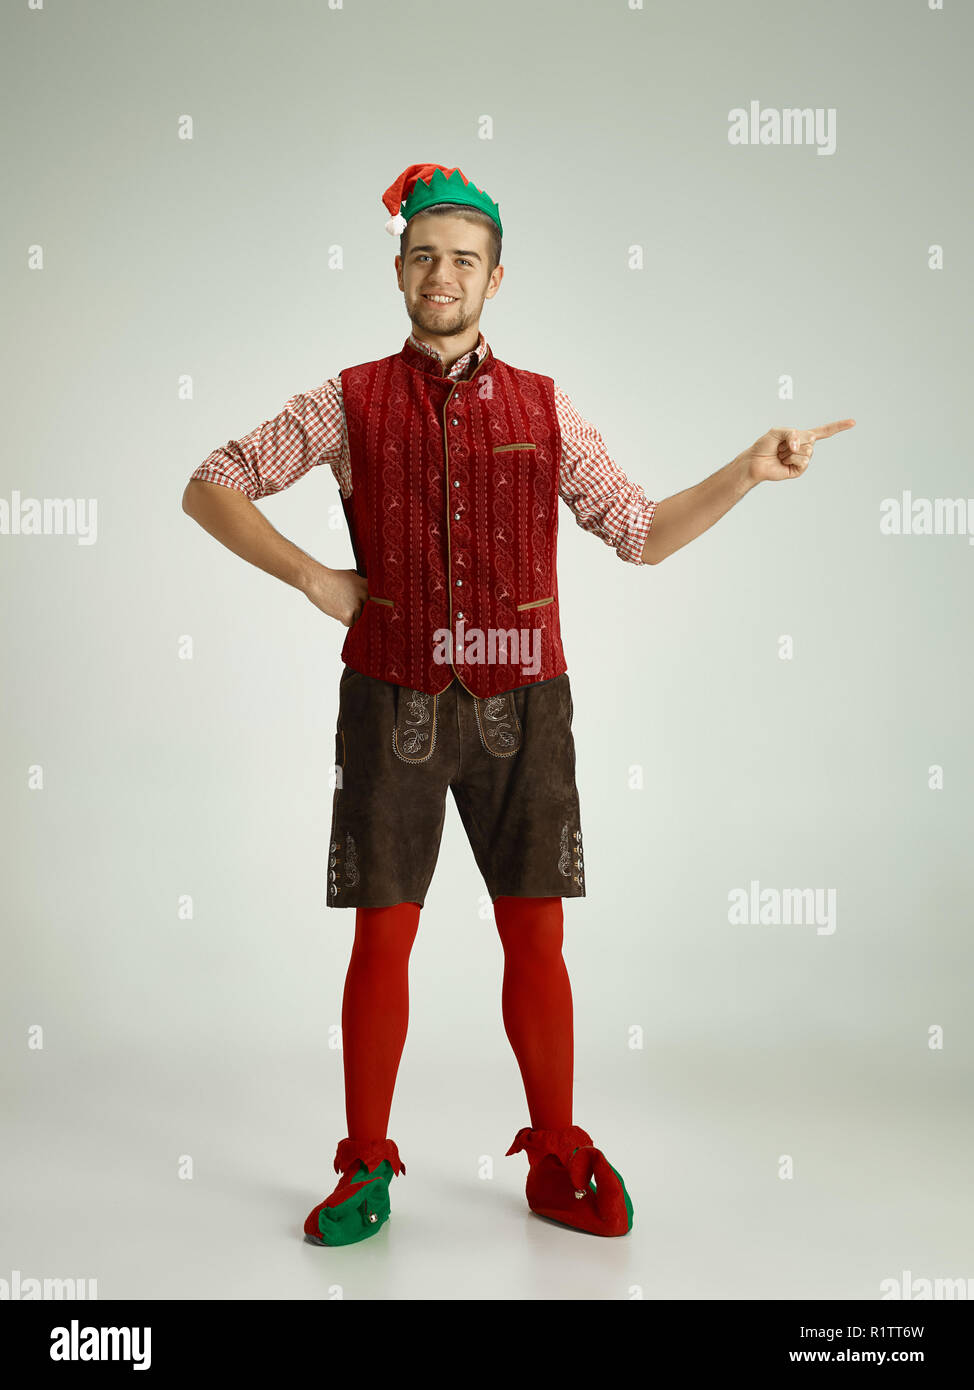 The happy smiling friendly man dressed like a funny gnome or elf pointing to left on an isolated gray studio background. The winter, holiday, christmas concept Stock Photo